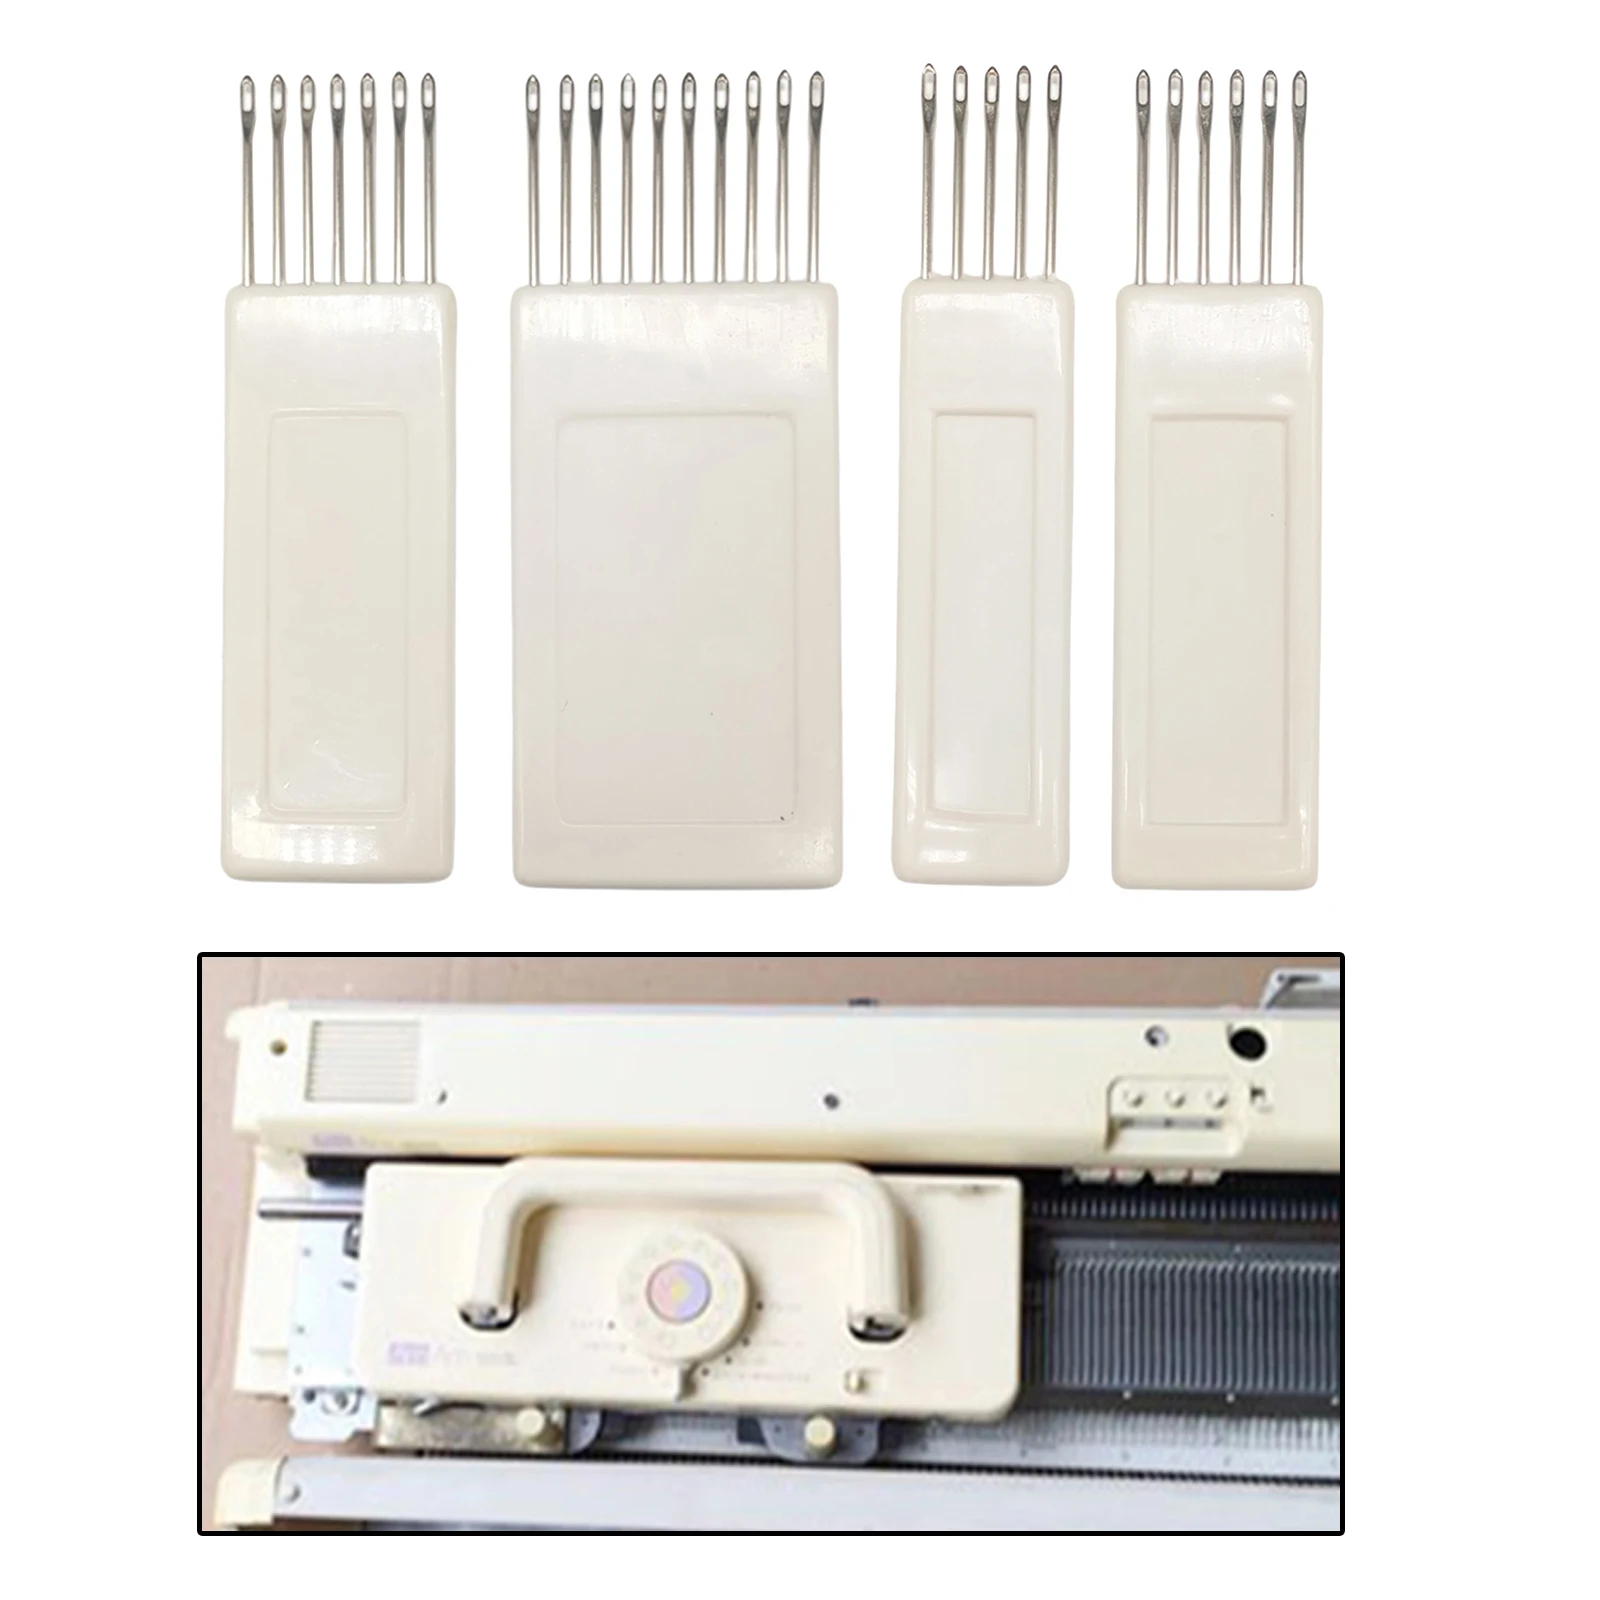 4Pcs Knitting Machine Transfer Comb 5/6/7/10 Needles for Brother KH-860 868 850 871 881 940 970 Sewing Tool